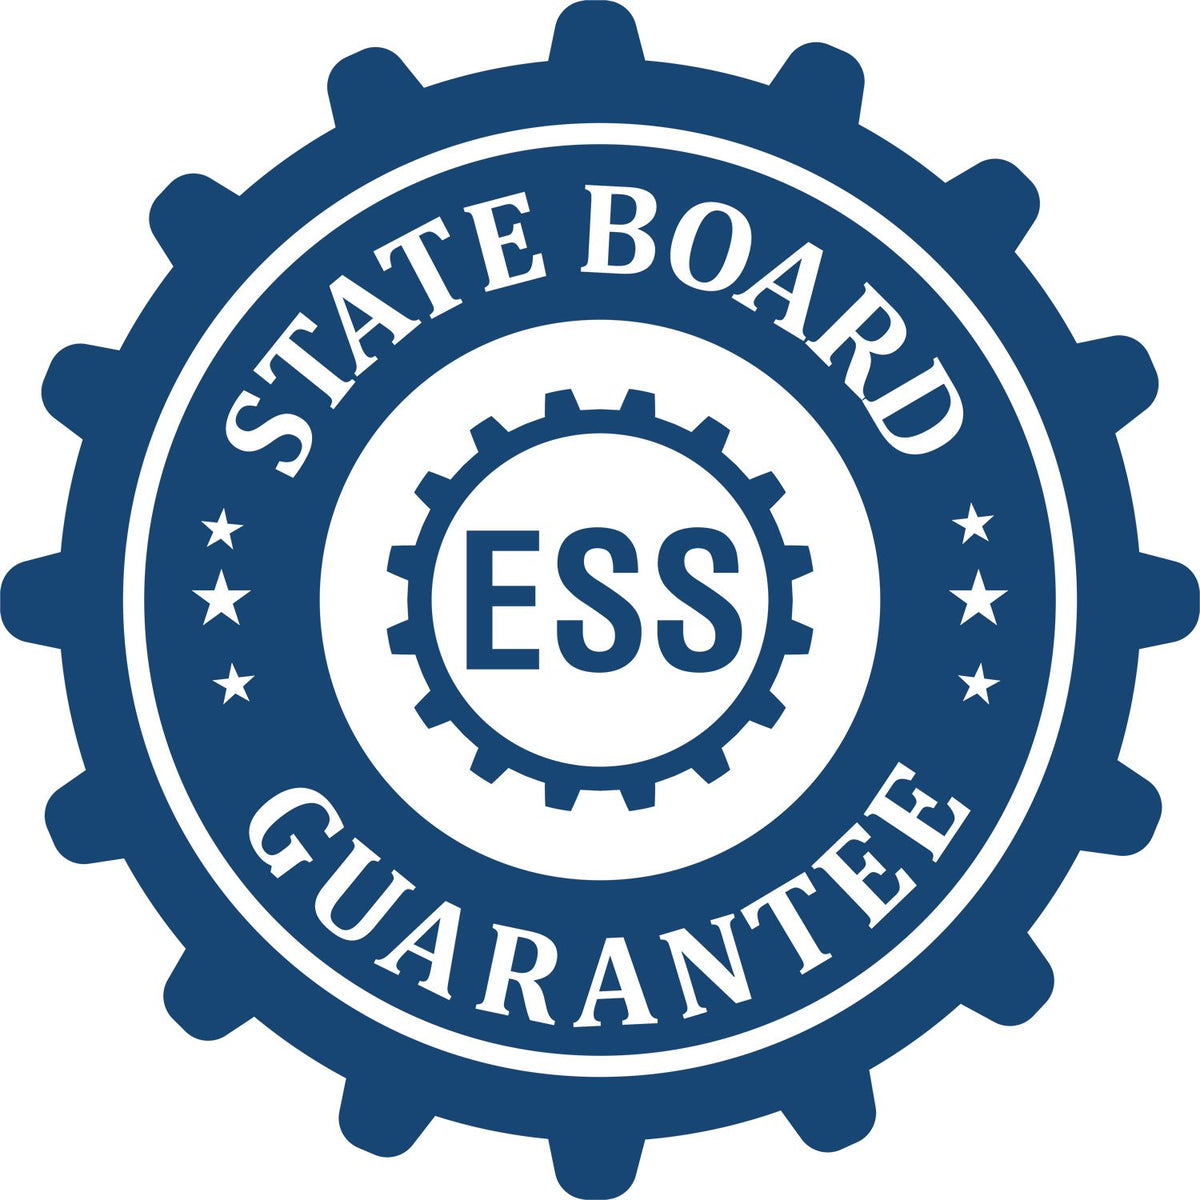 An emblem in a gear shape illustrating a state board guarantee for the State of Florida Extended Long Reach Engineer Seal product.